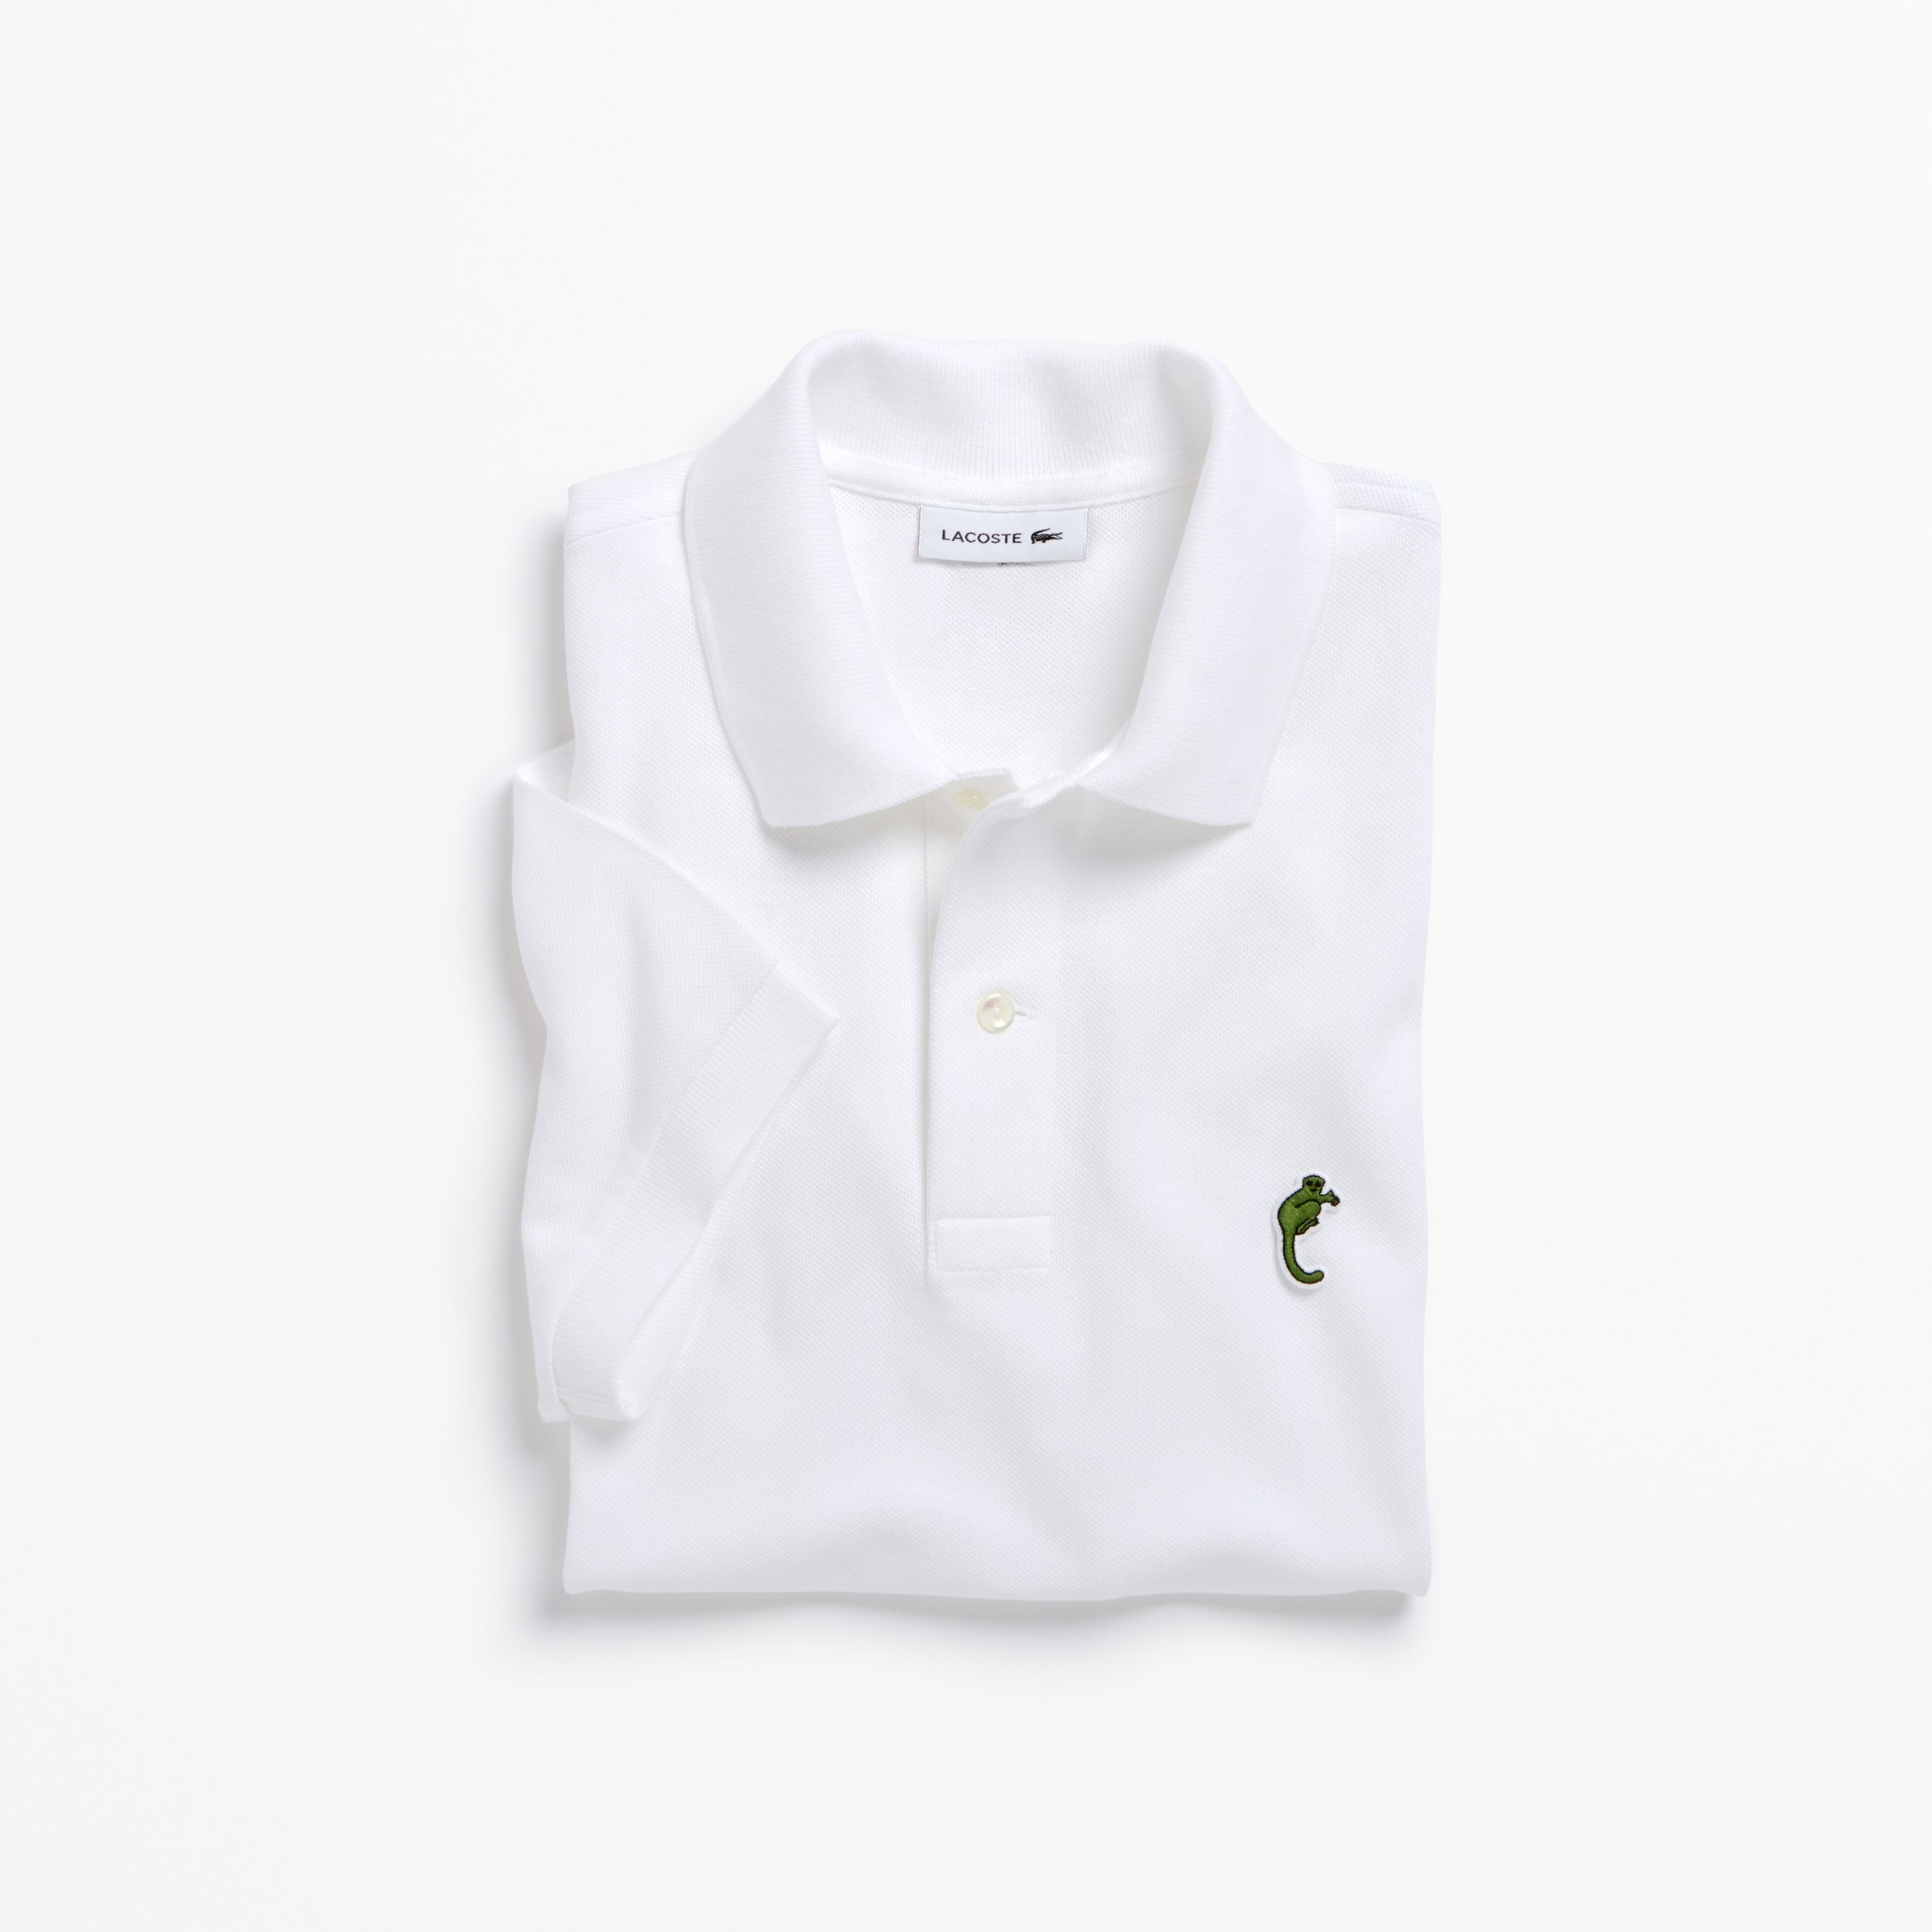 Lacoste crocodile logo replaced by 